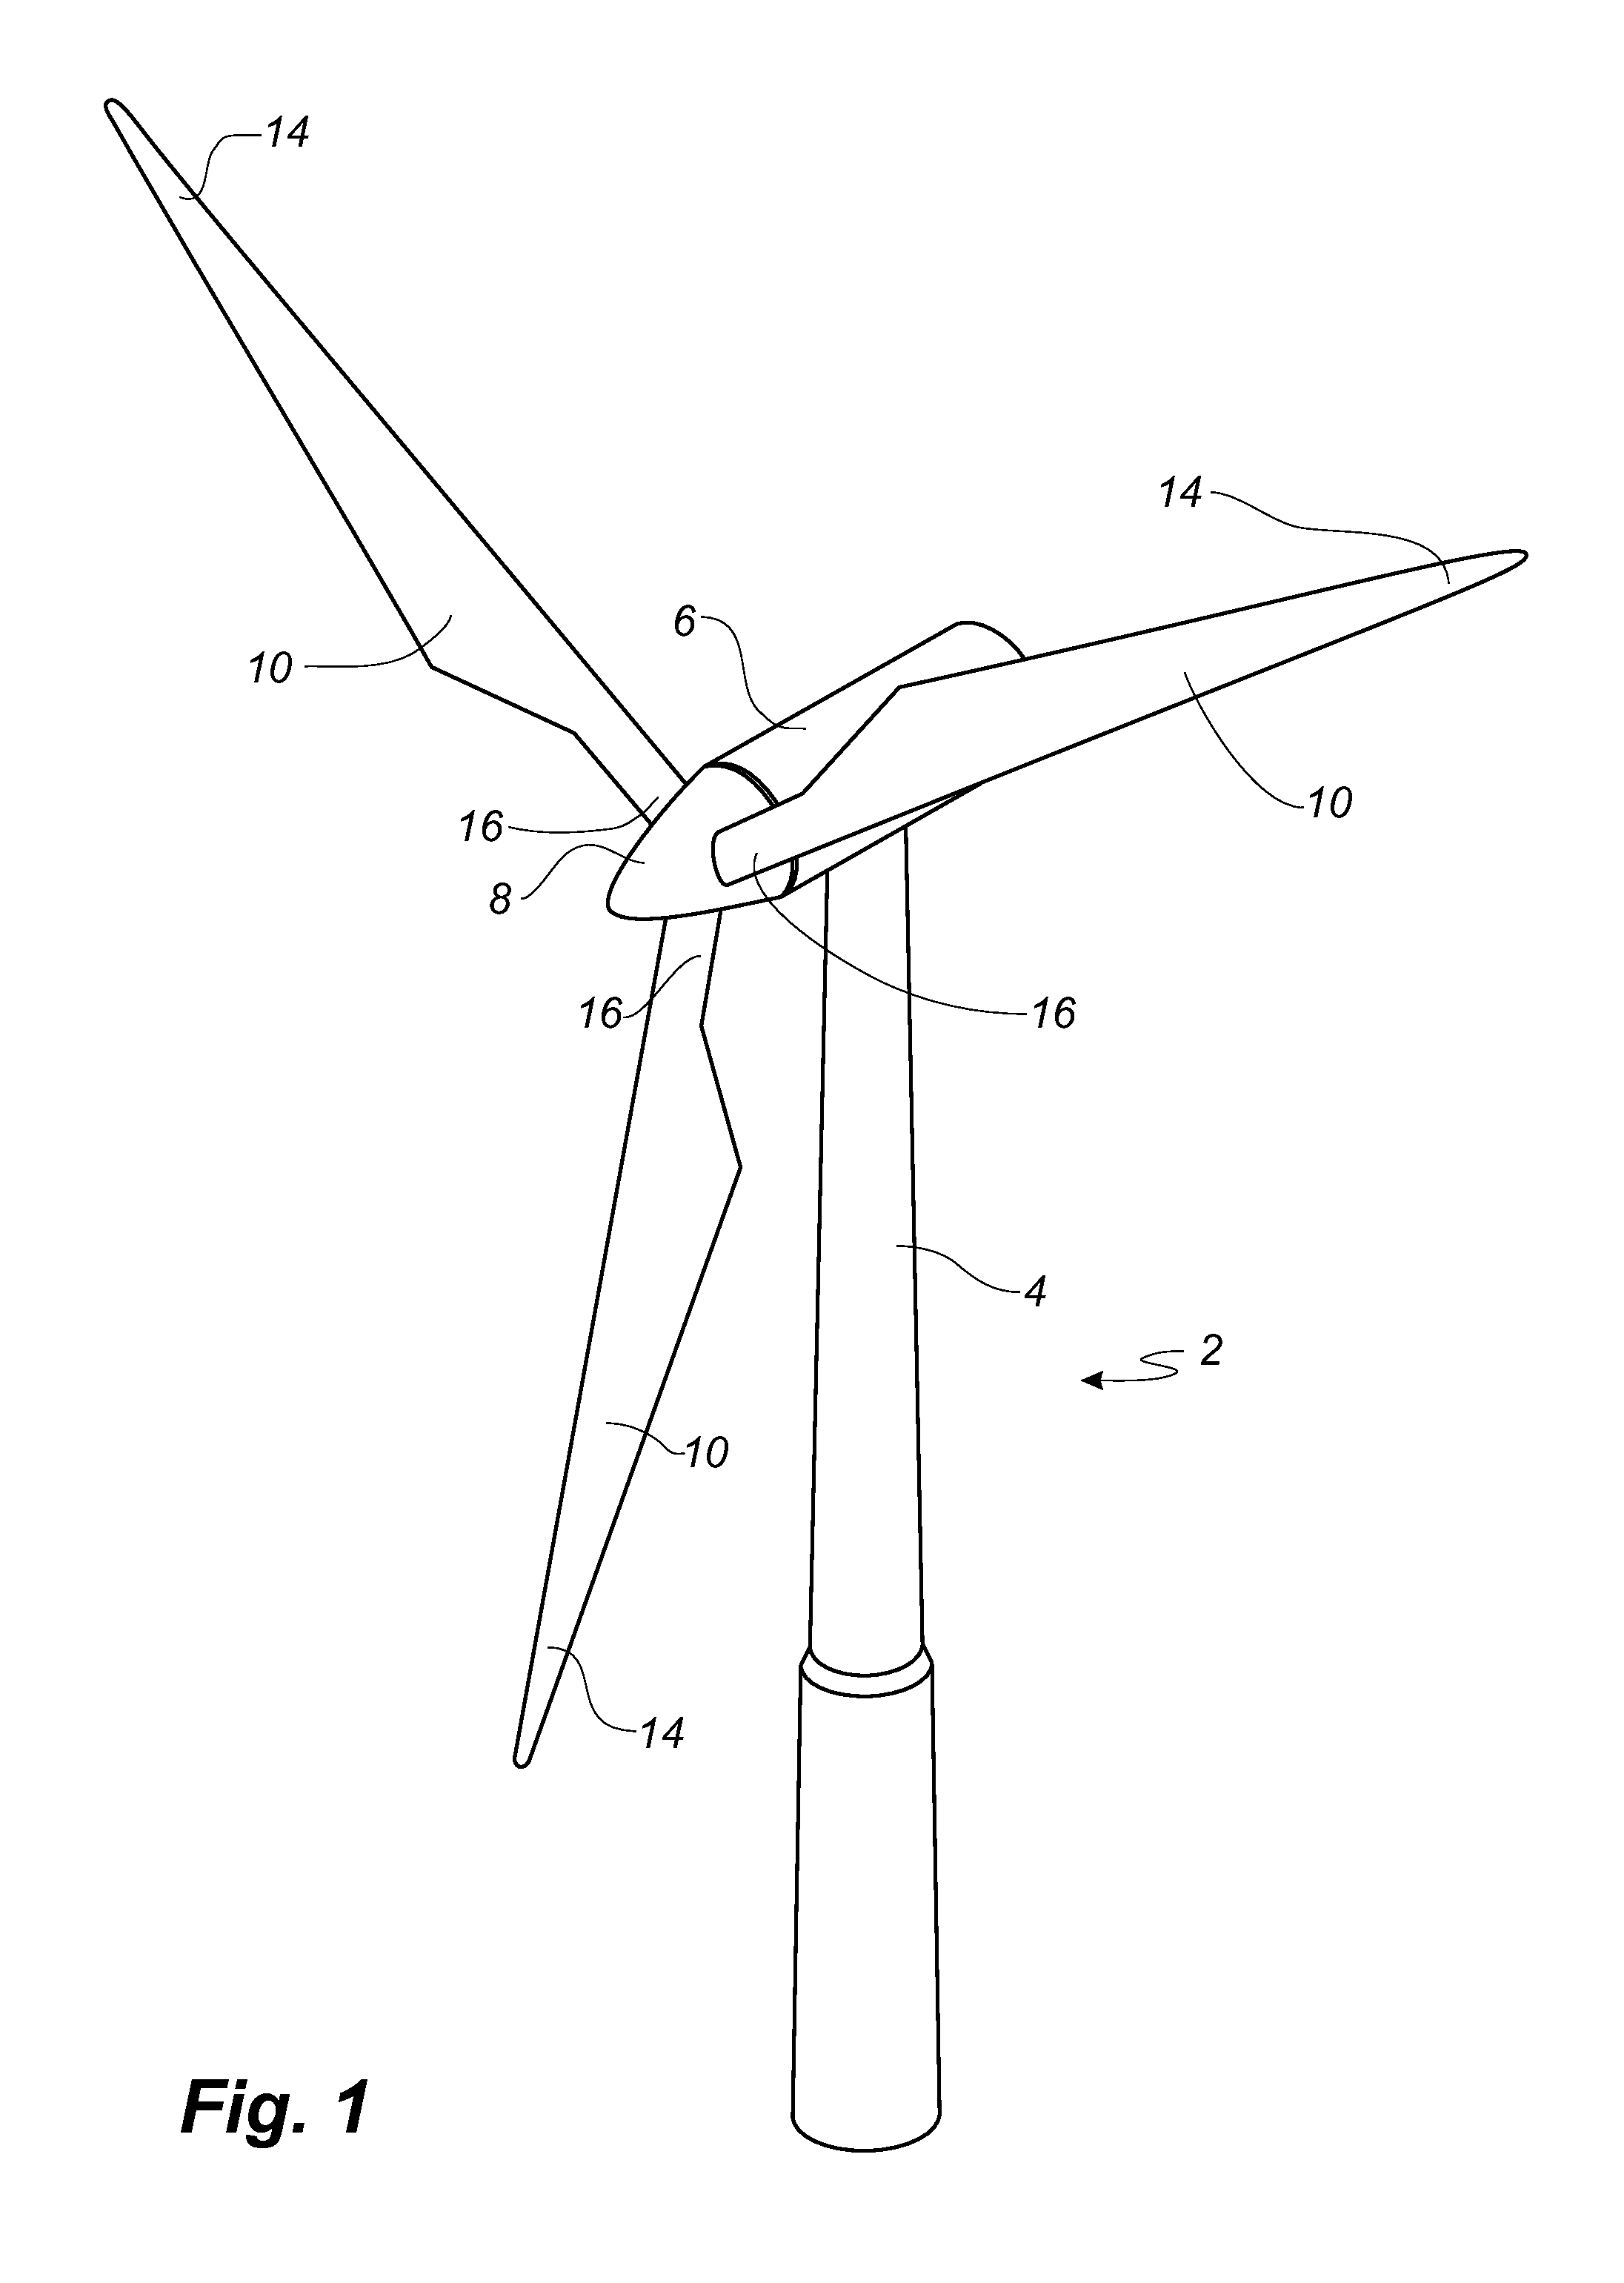 Wind turbine blade provided with optical wind velocity measurement system